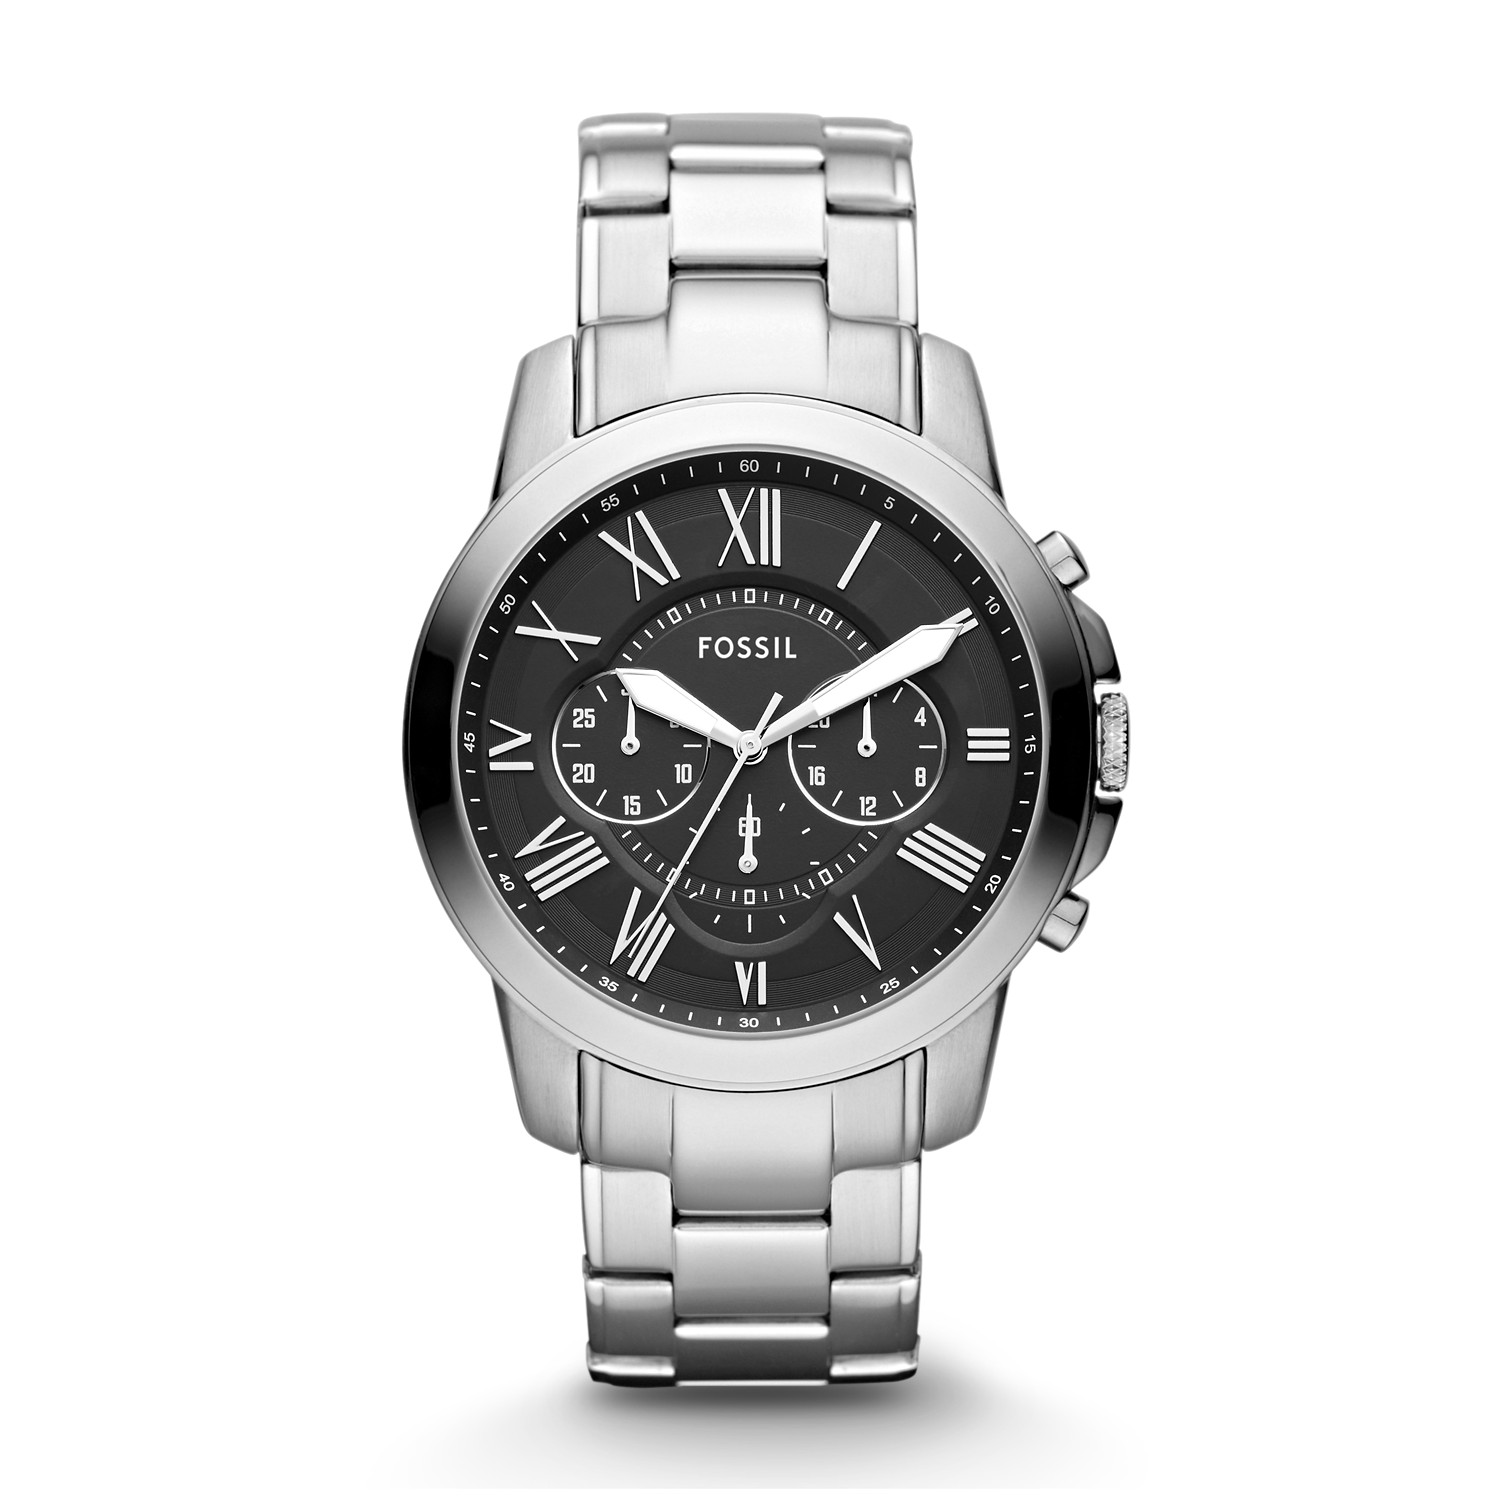 Fossil Watch All Stainless Steel 5 Atm